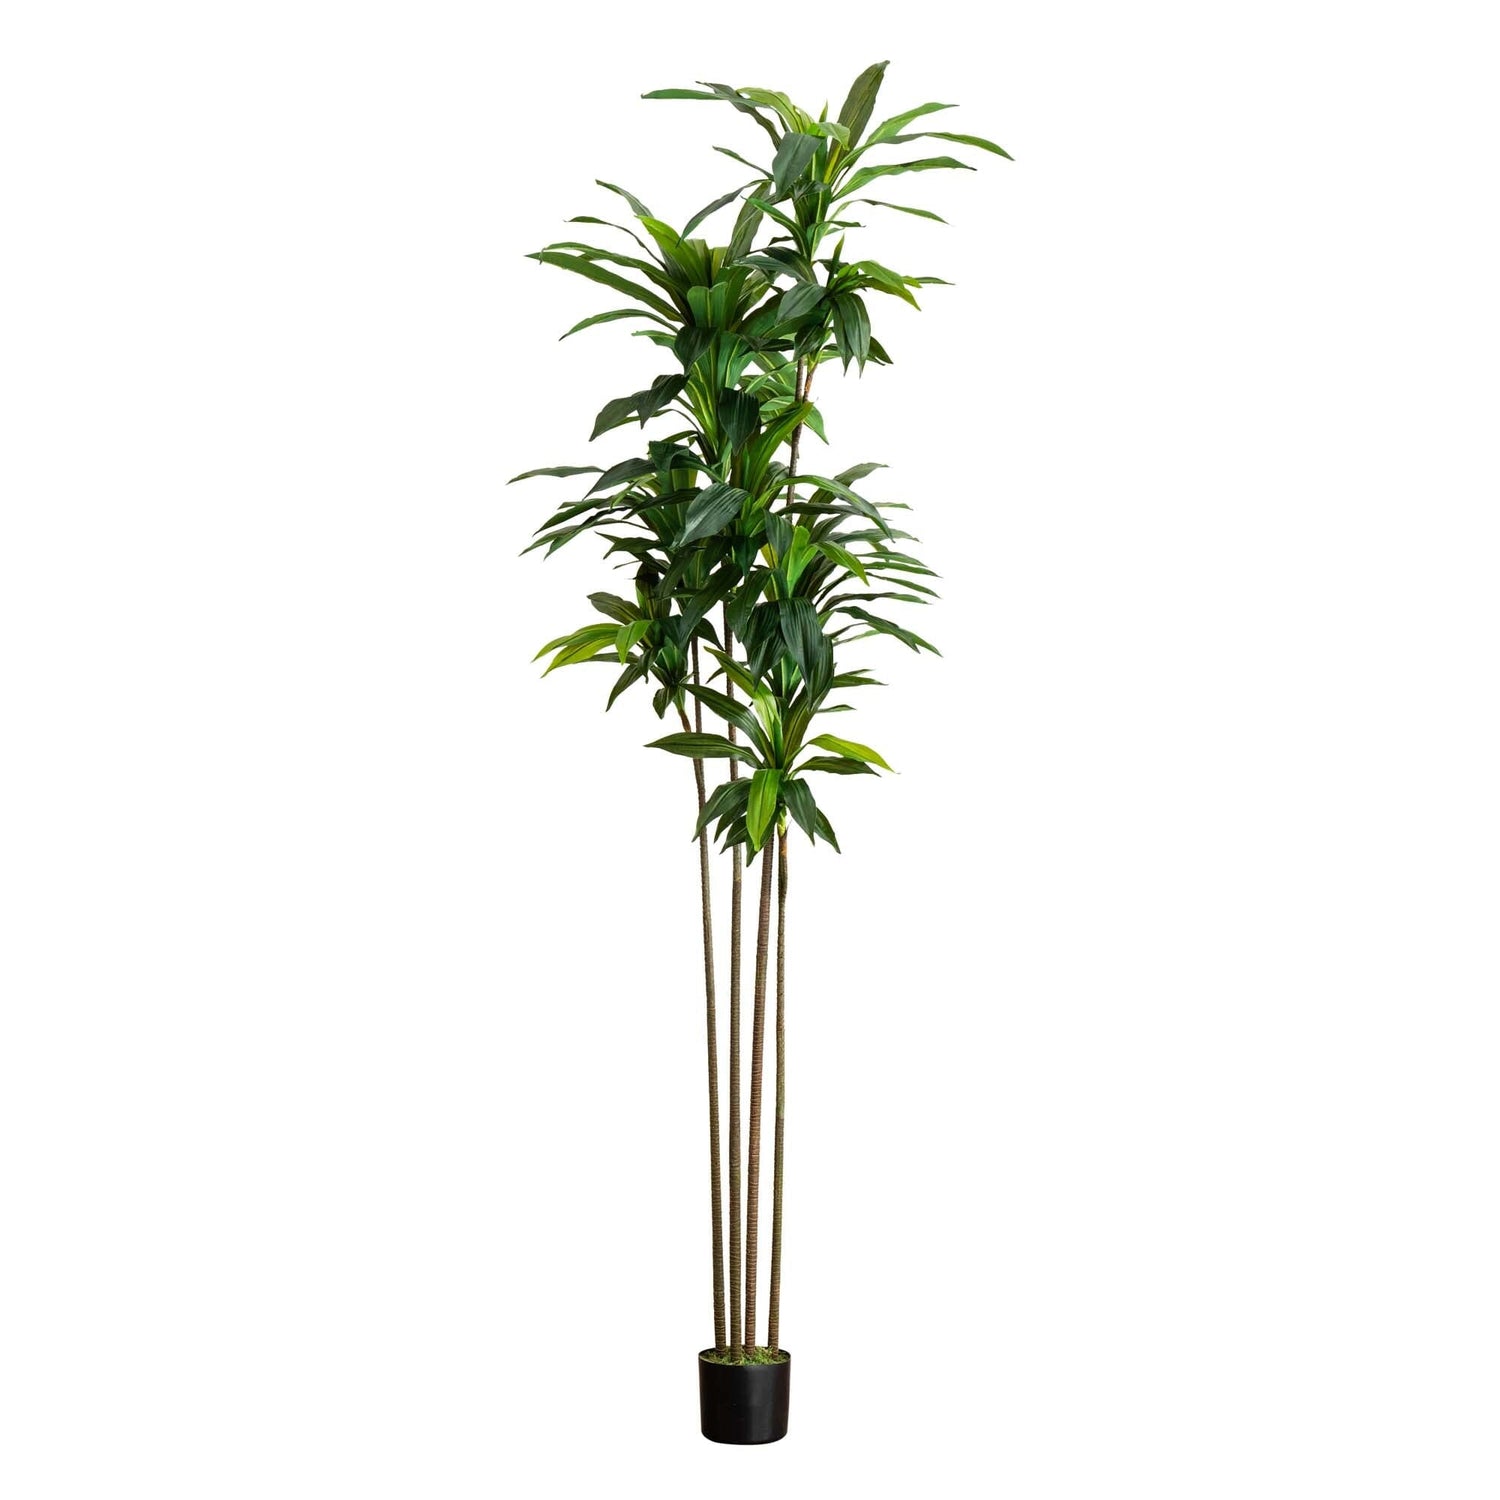 8’ Artificial Dracaena Tree with Real Touch Leaves